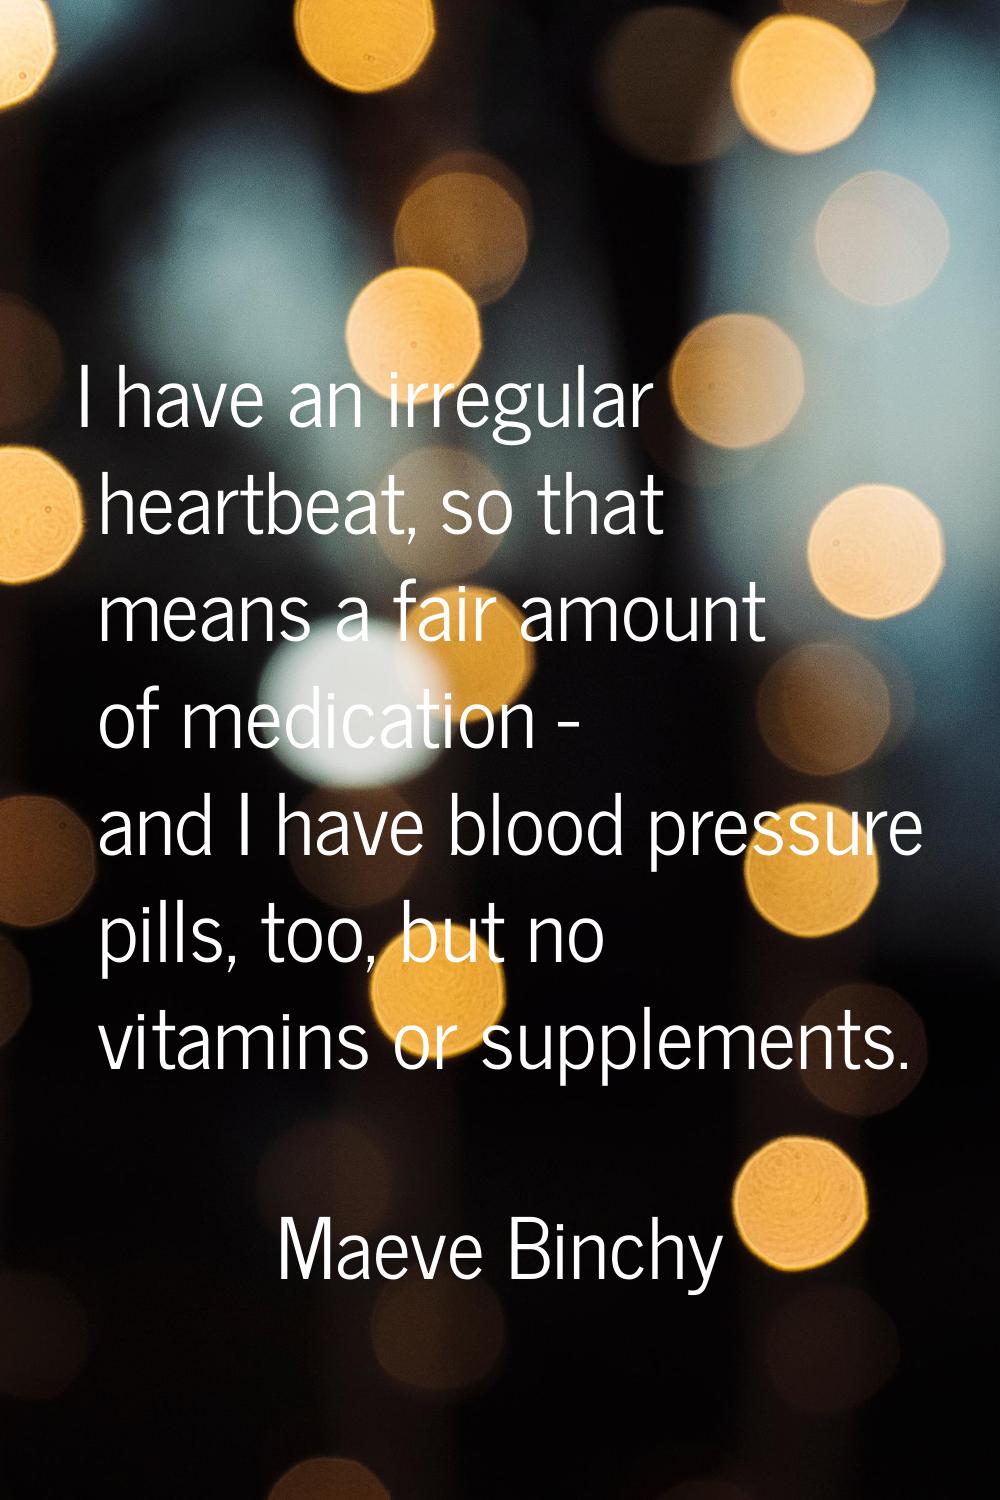 I have an irregular heartbeat, so that means a fair amount of medication - and I have blood pressur